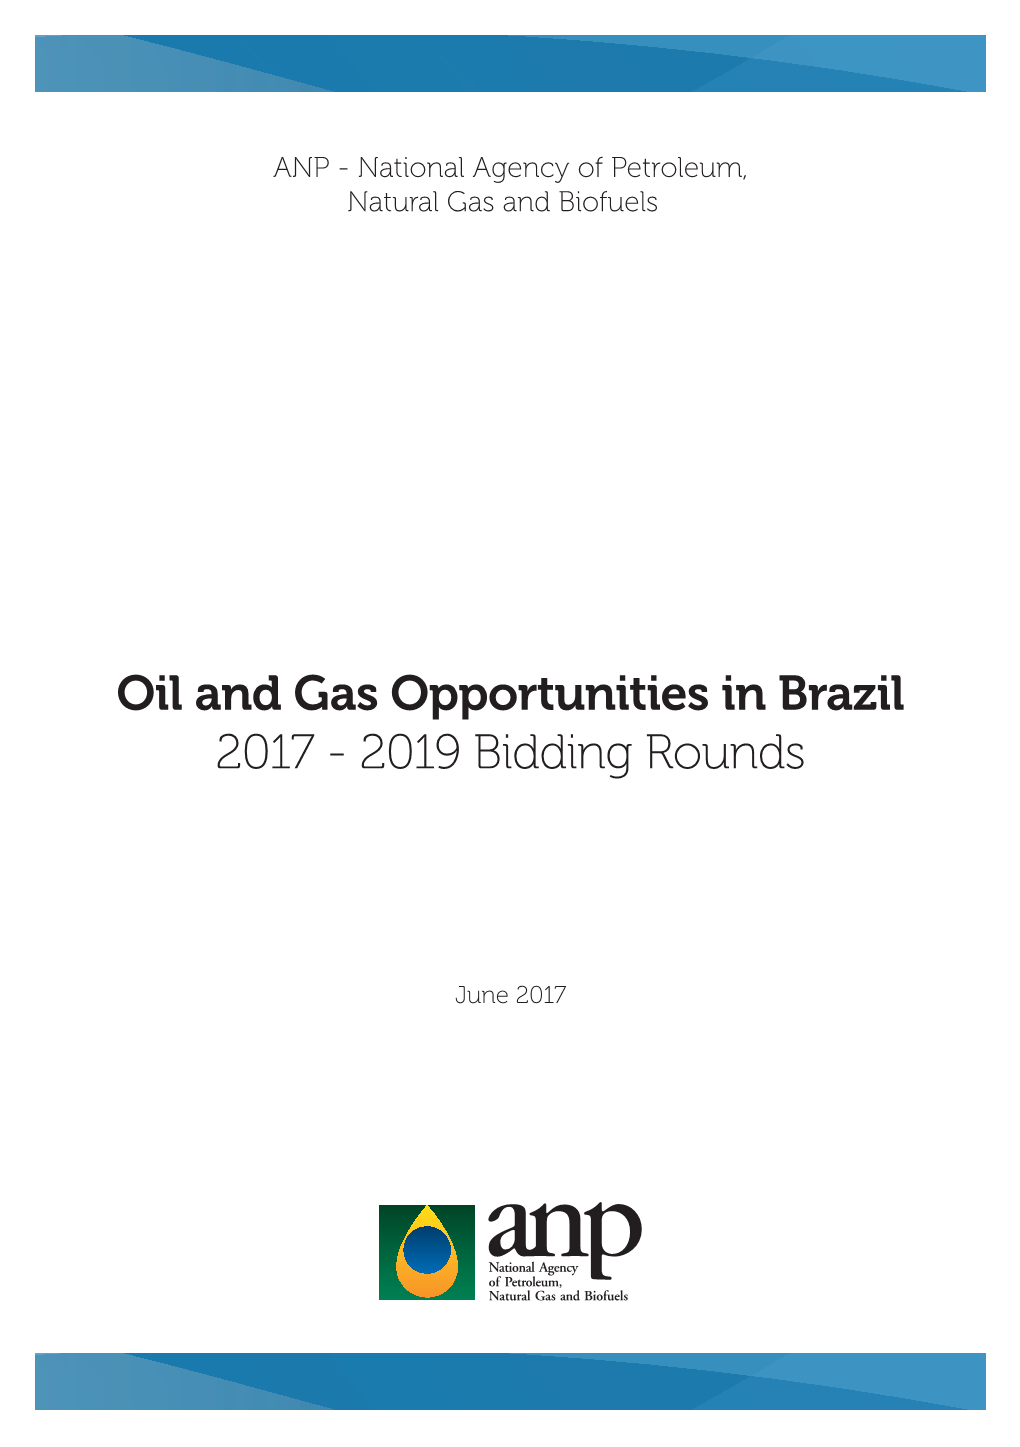 Oil and Gas Opportunities in Brazil 2017 - 2019 Bidding Rounds